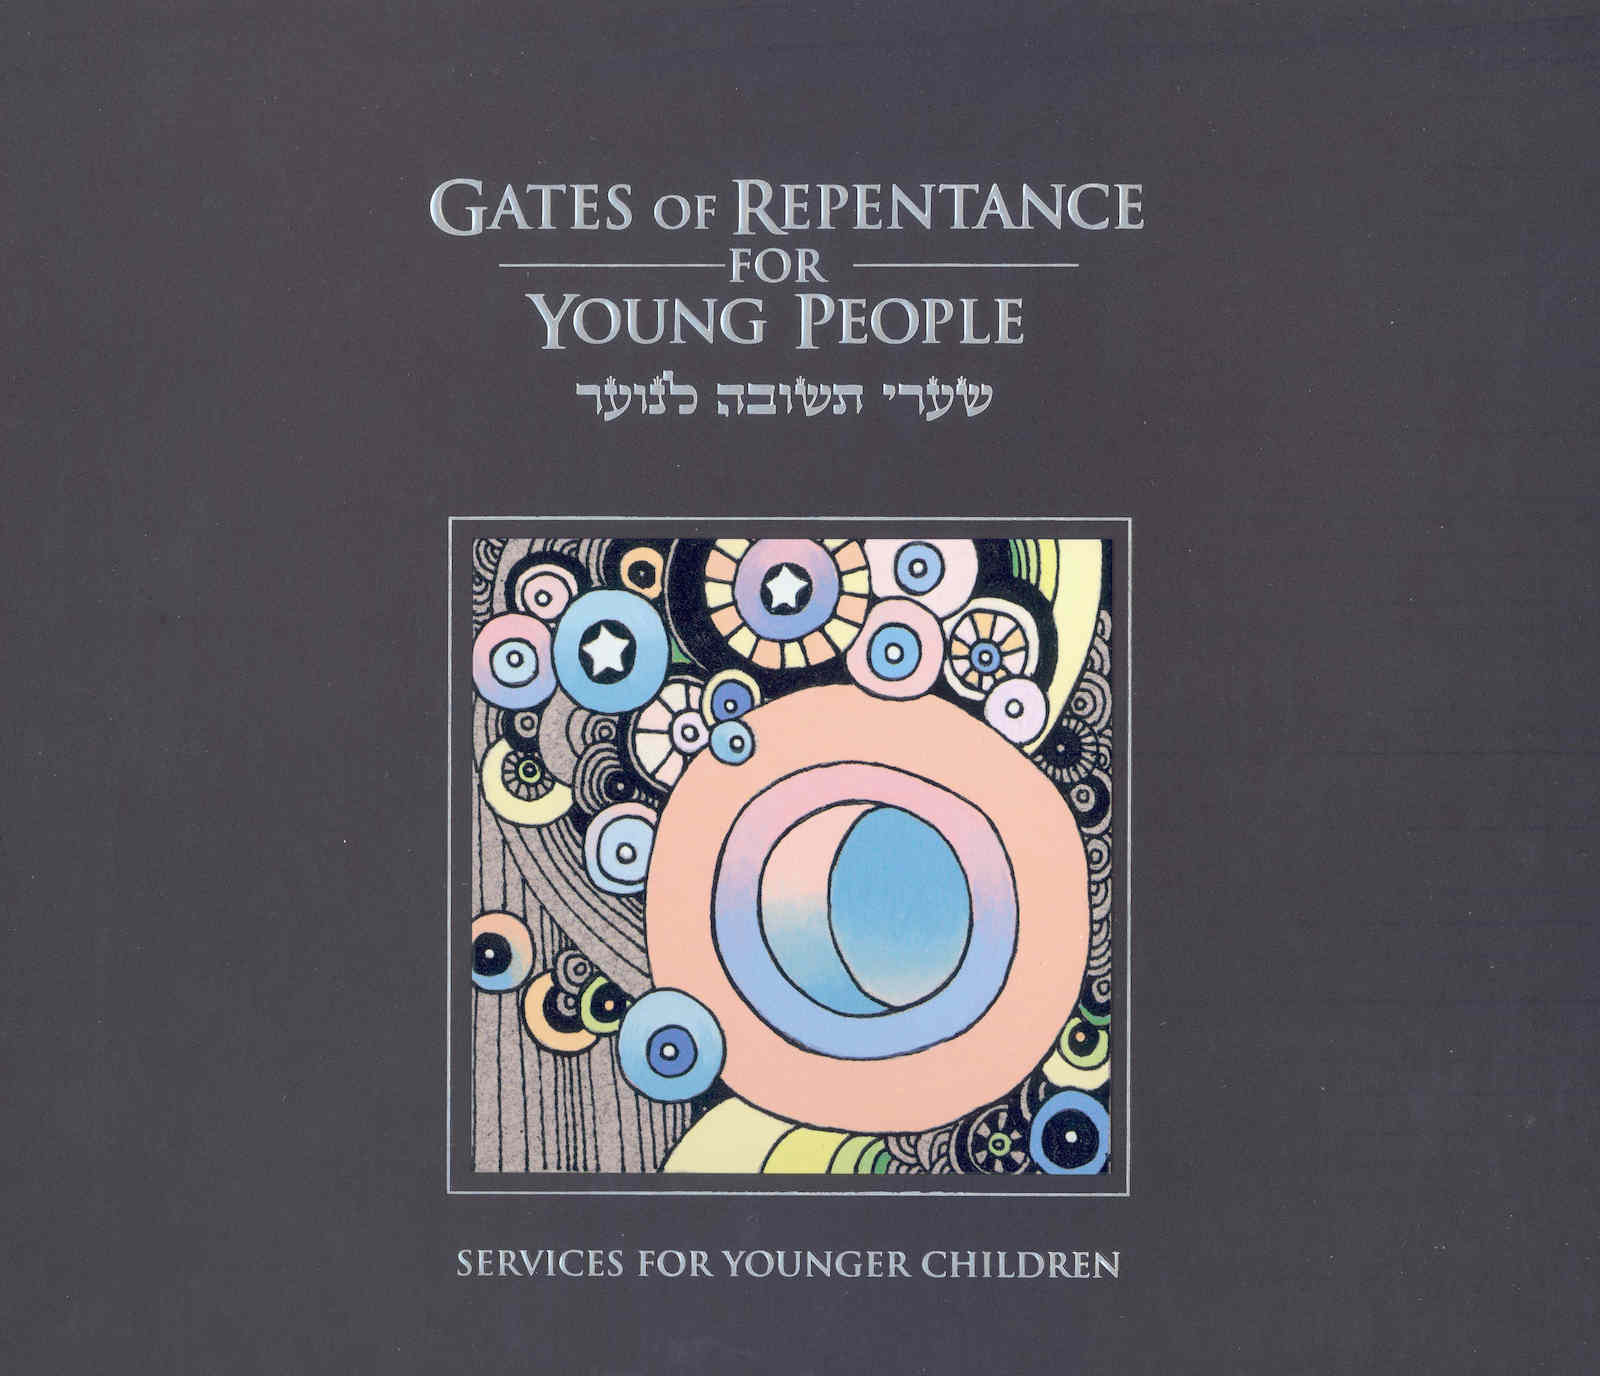 Gates of Repentance for Young People